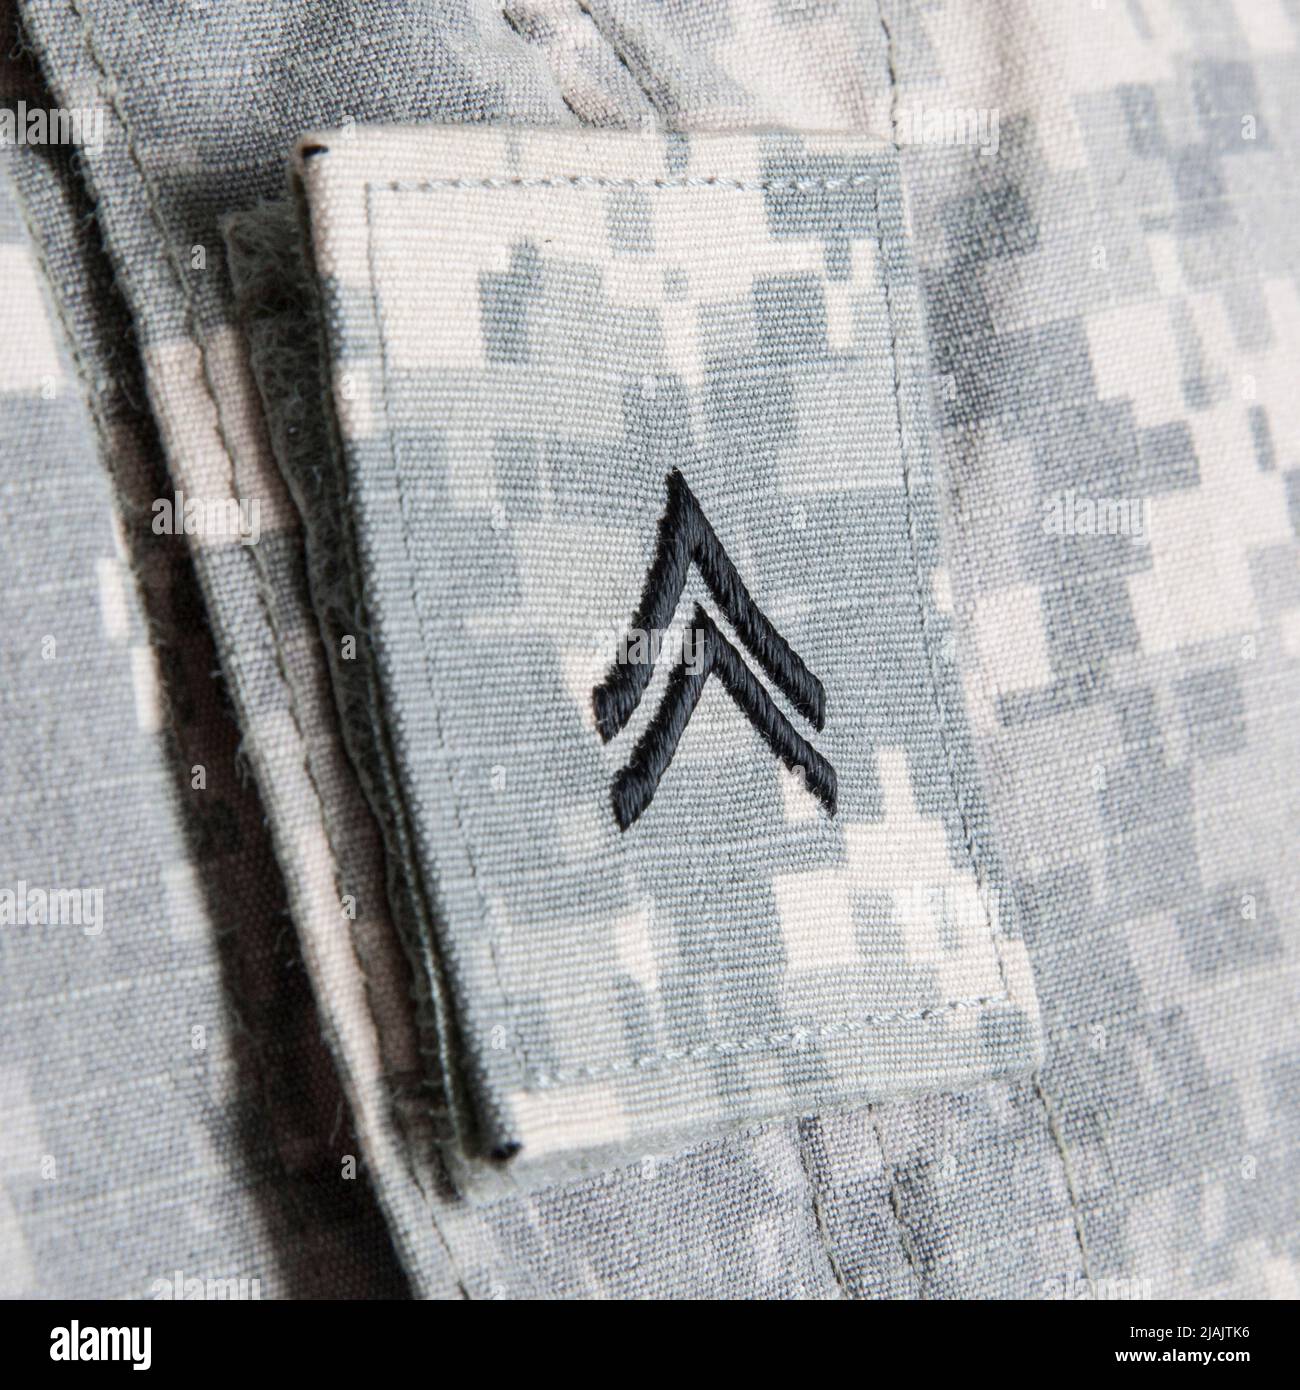 Close-up of U.S. Army soldiers corporal rank insignia embroidered on Army combat uniform. Stock Photo